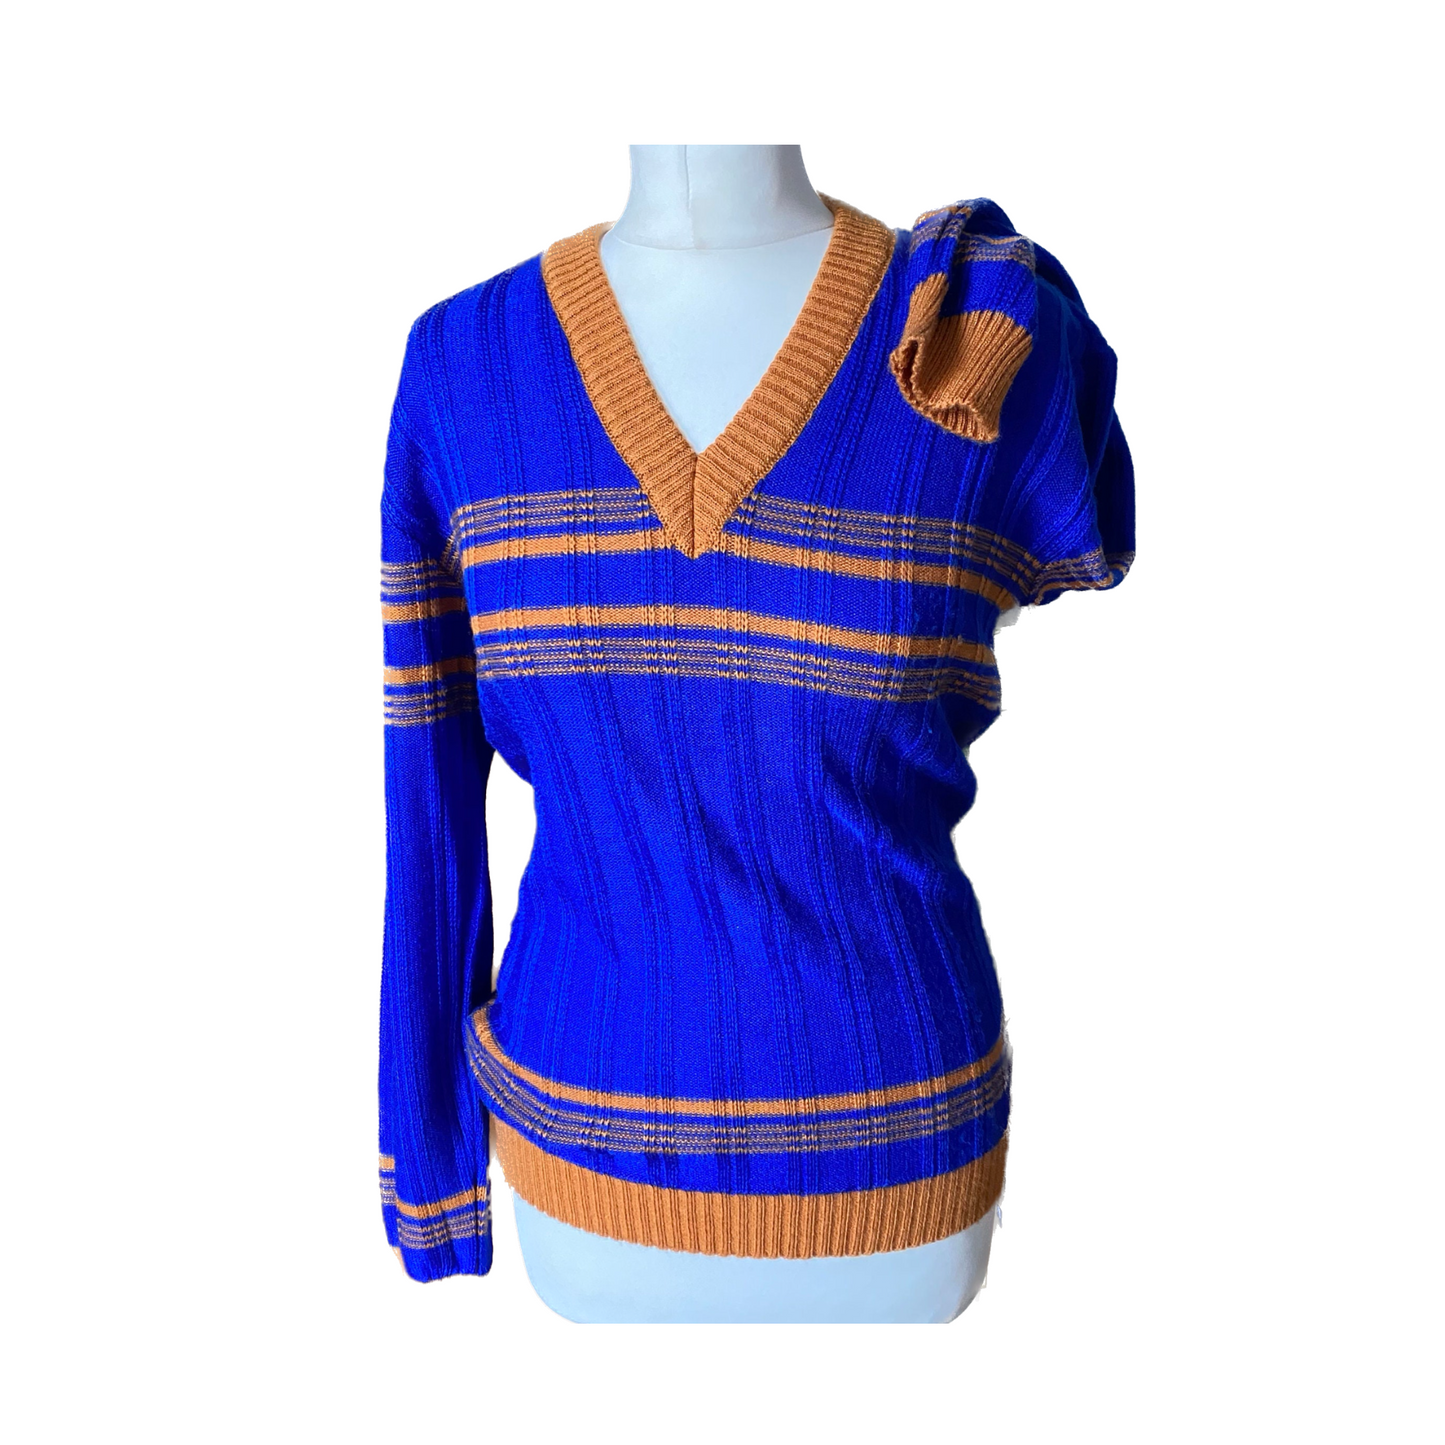 70s fitted blue ribbed sweater with mustard stripes - retro chic